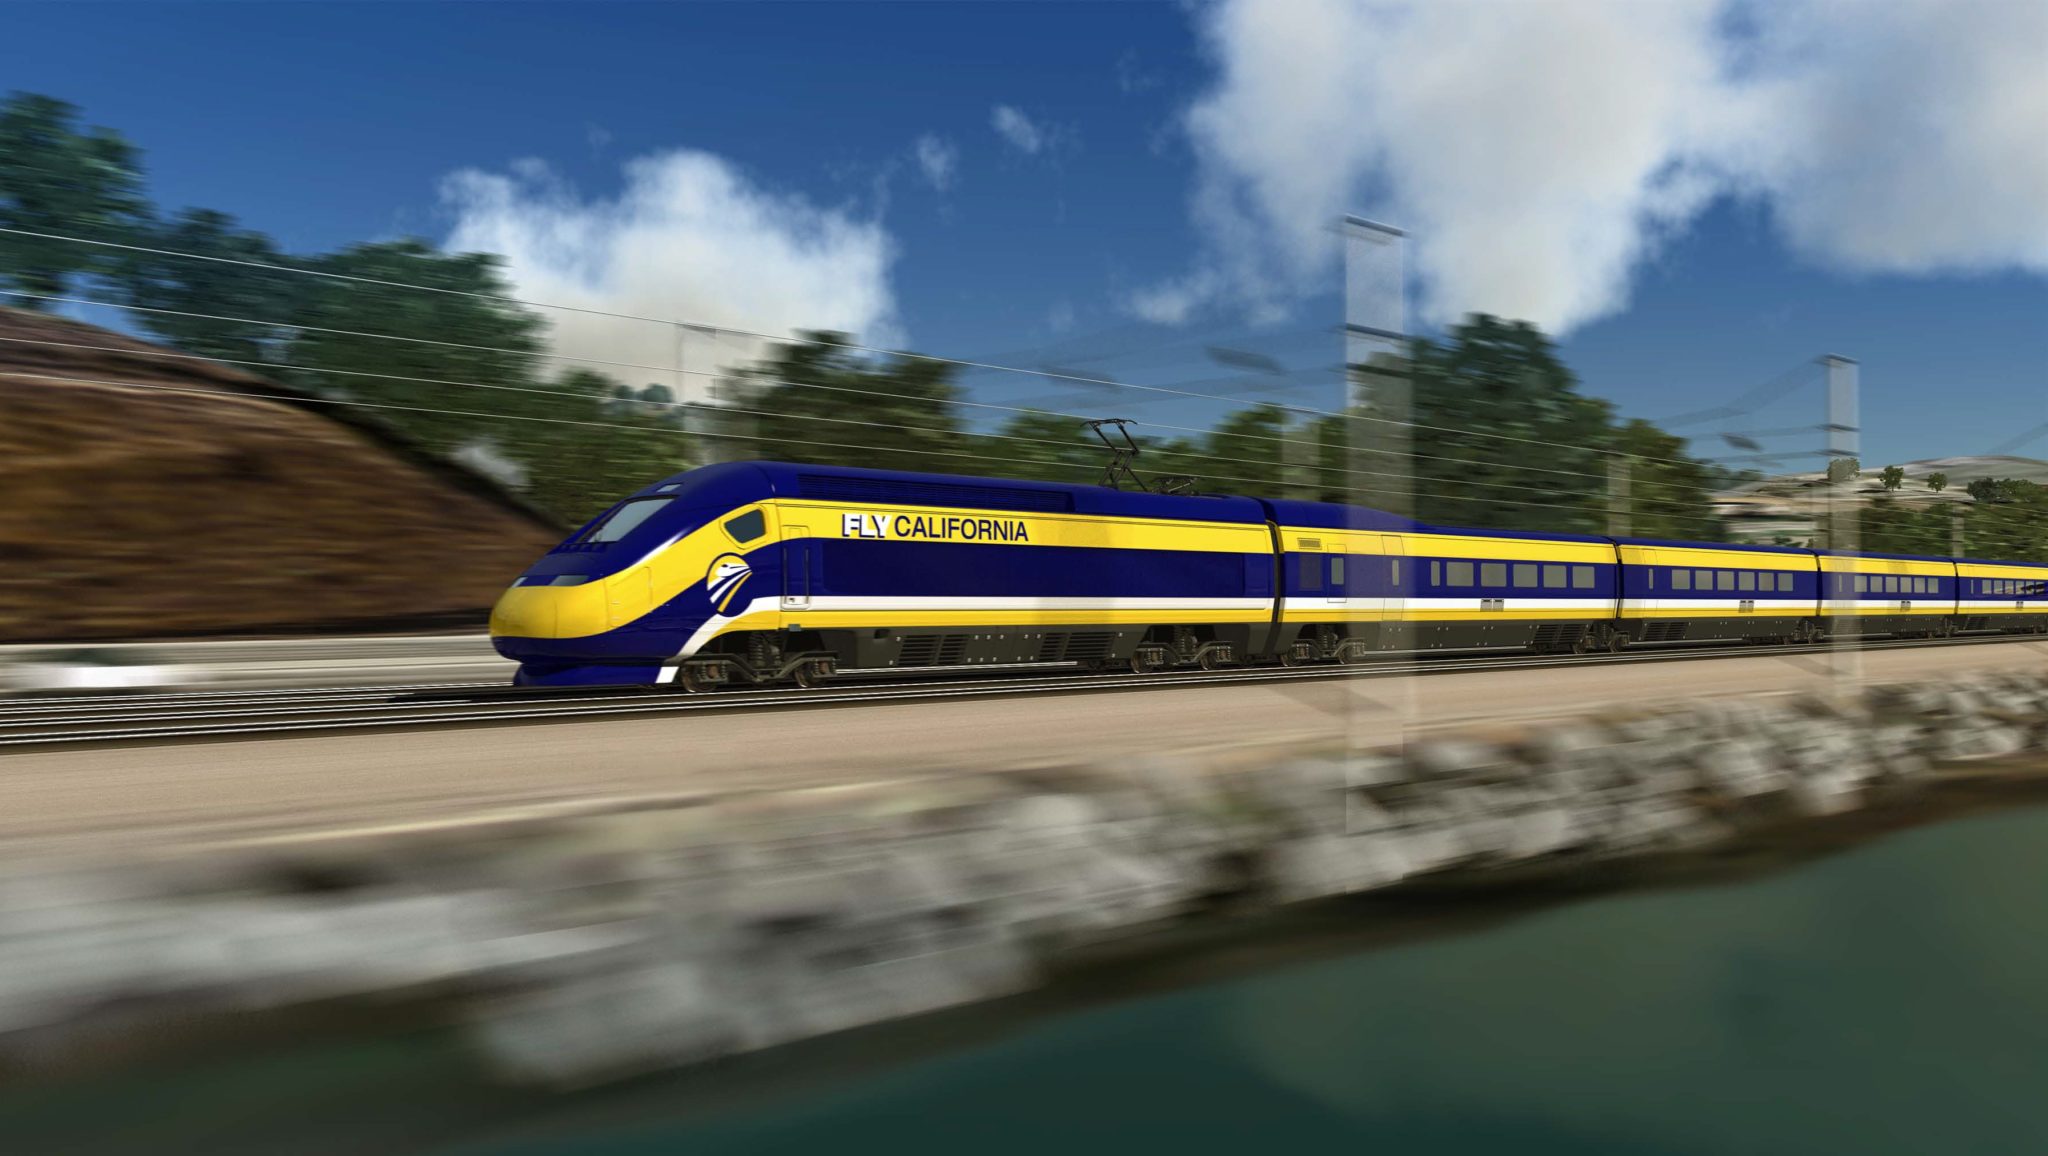 Rendering of the California High Speed train